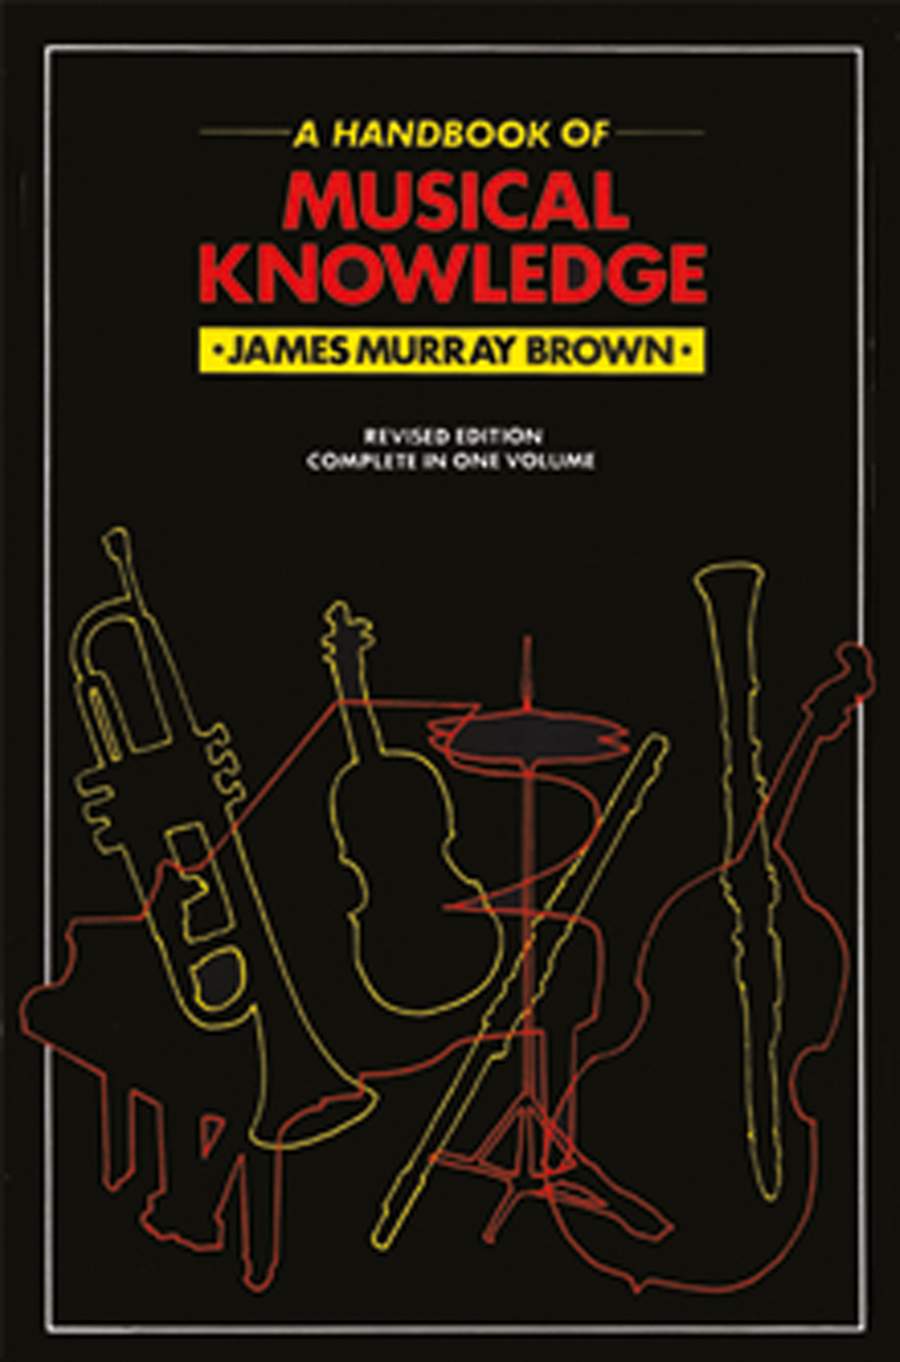 Handbook Of Musical Knowledge published by Trinity Guildhall